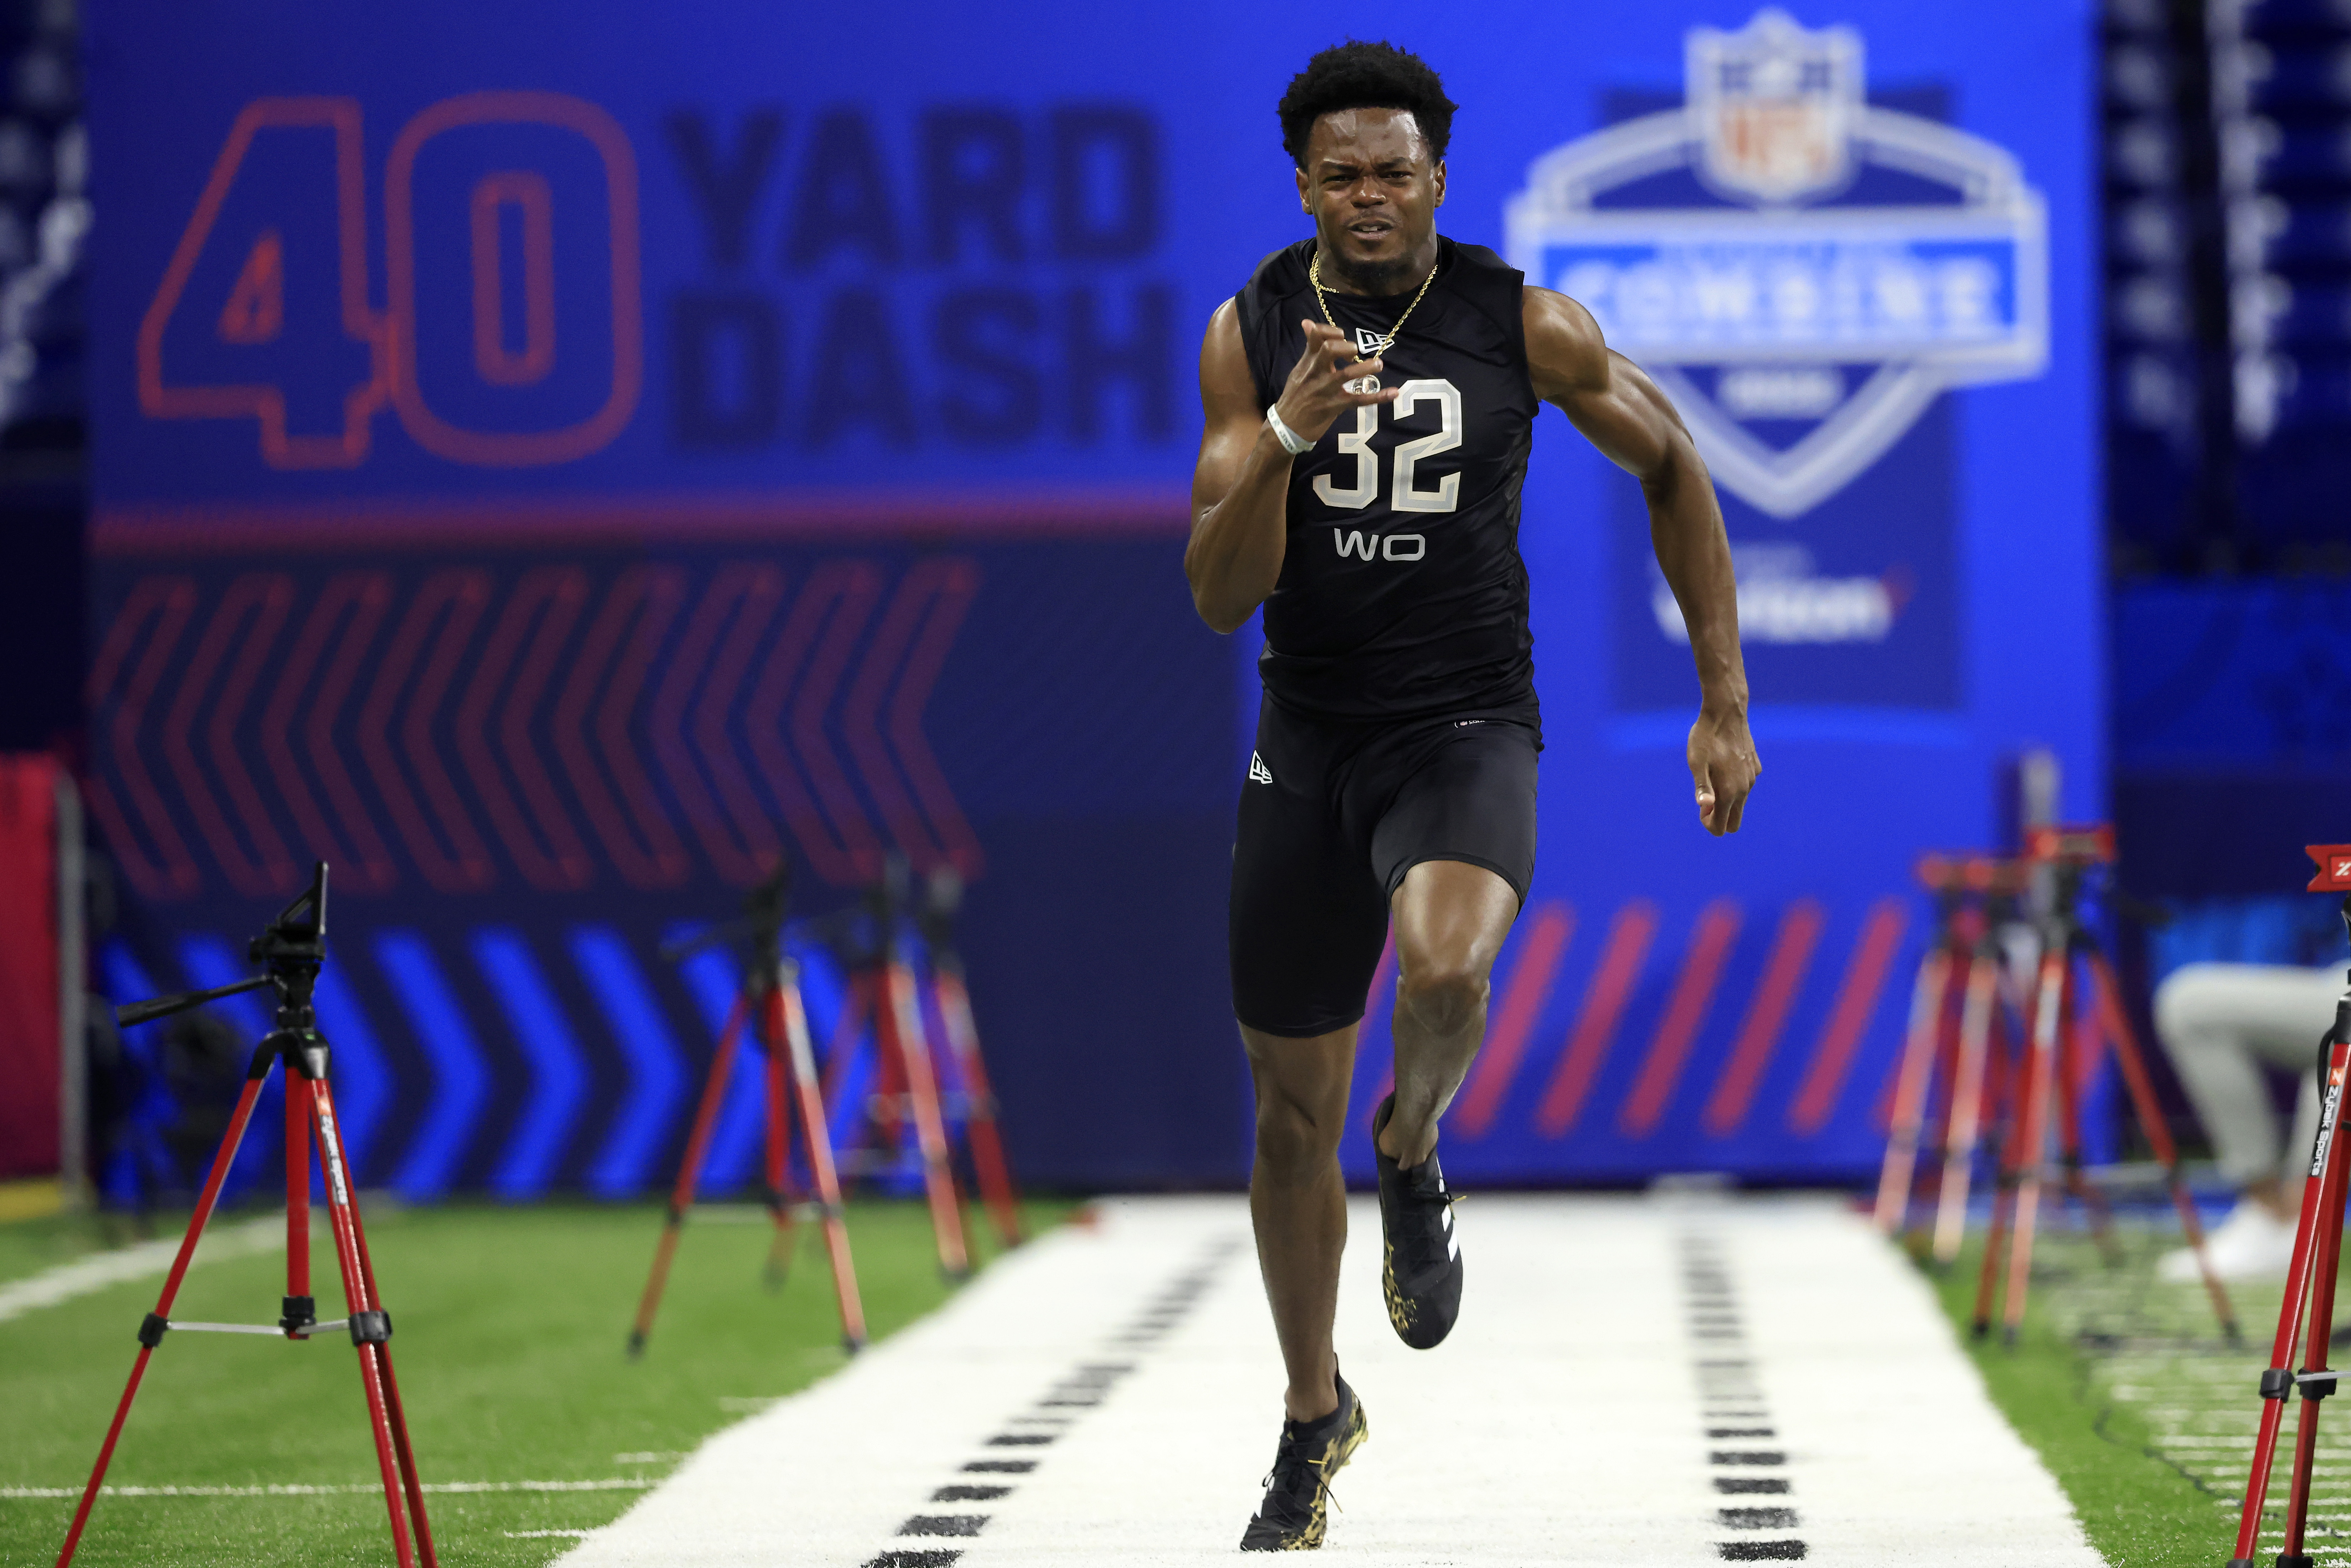 Baylor wide receiver Tyquan Thornton runs the 40-yard dash at the NFL Combine